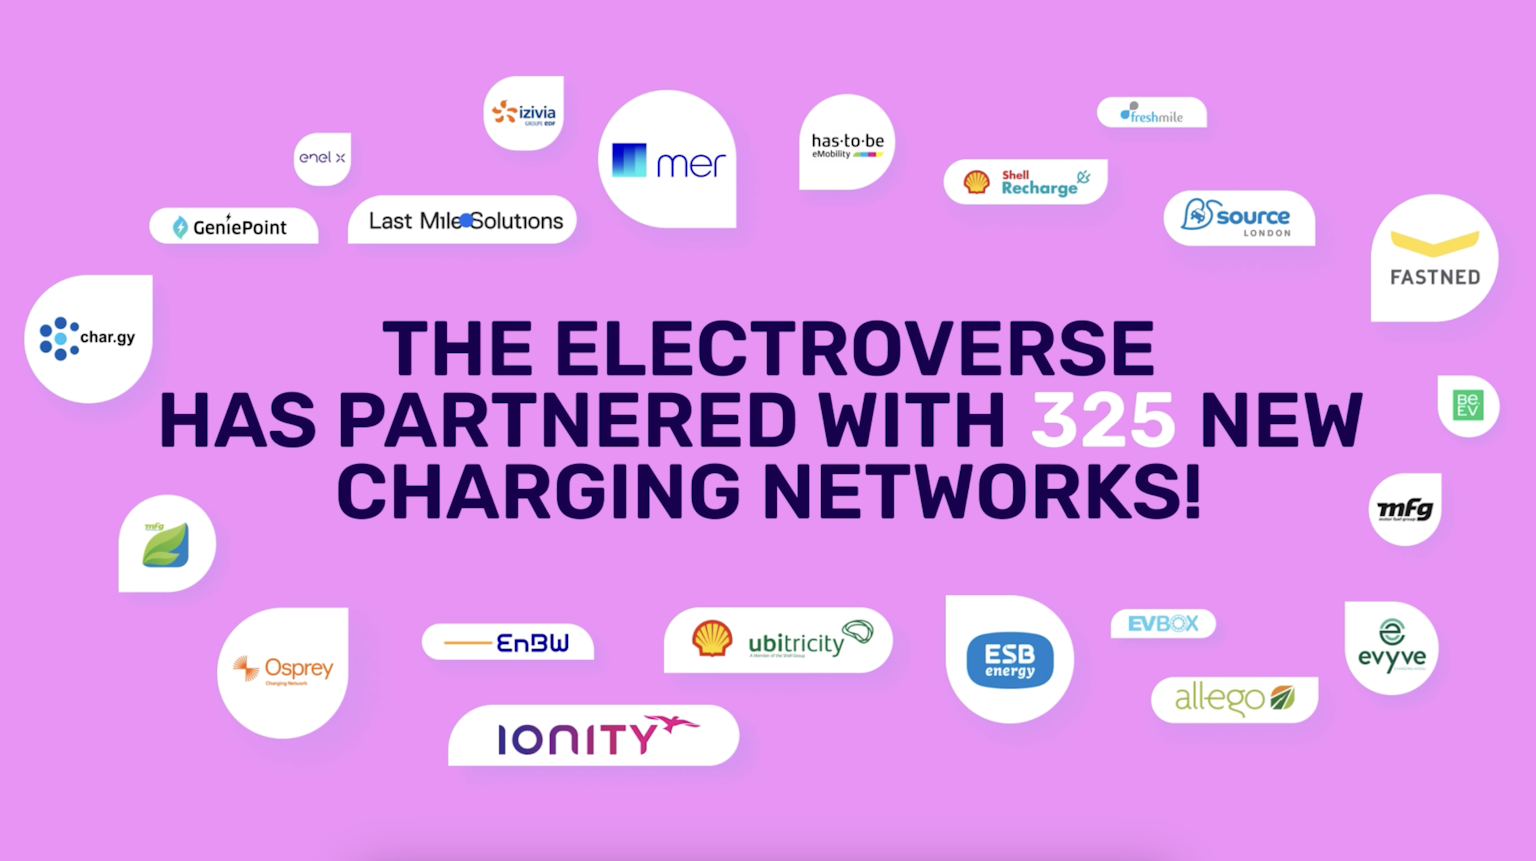 Image shows Octopus electroverse partners in 2022